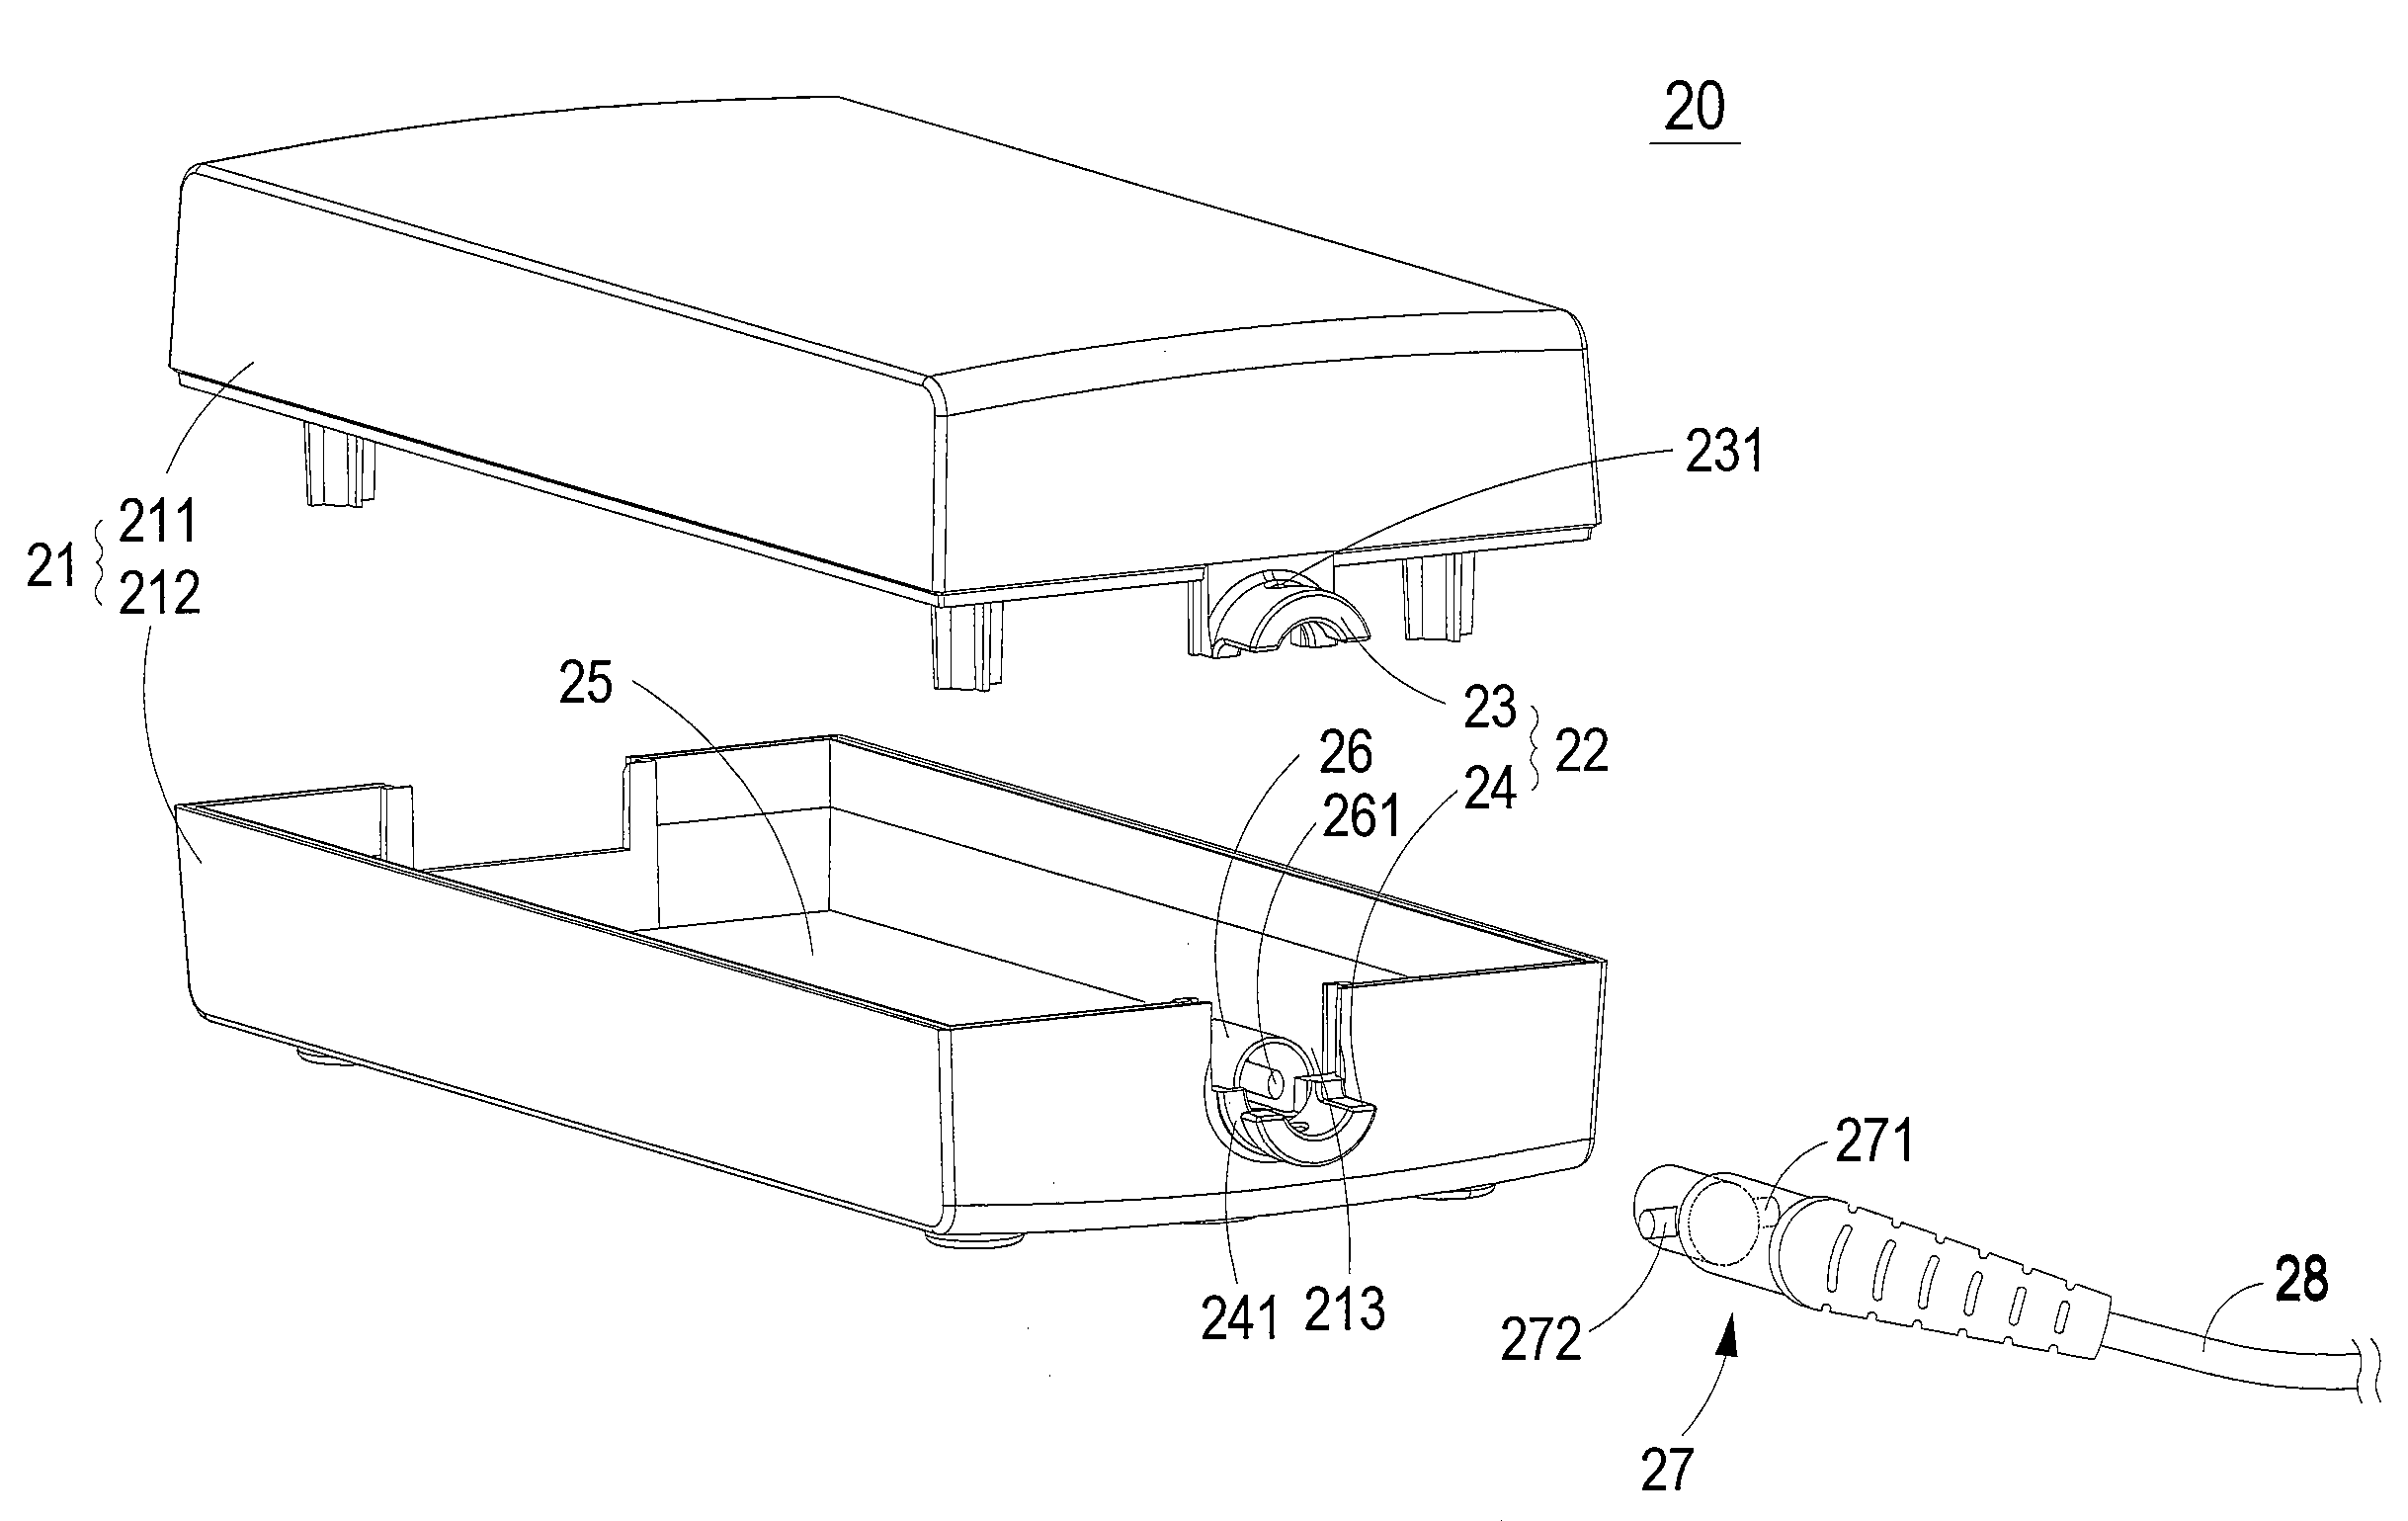 Power adapter having detachable power cable coupler head